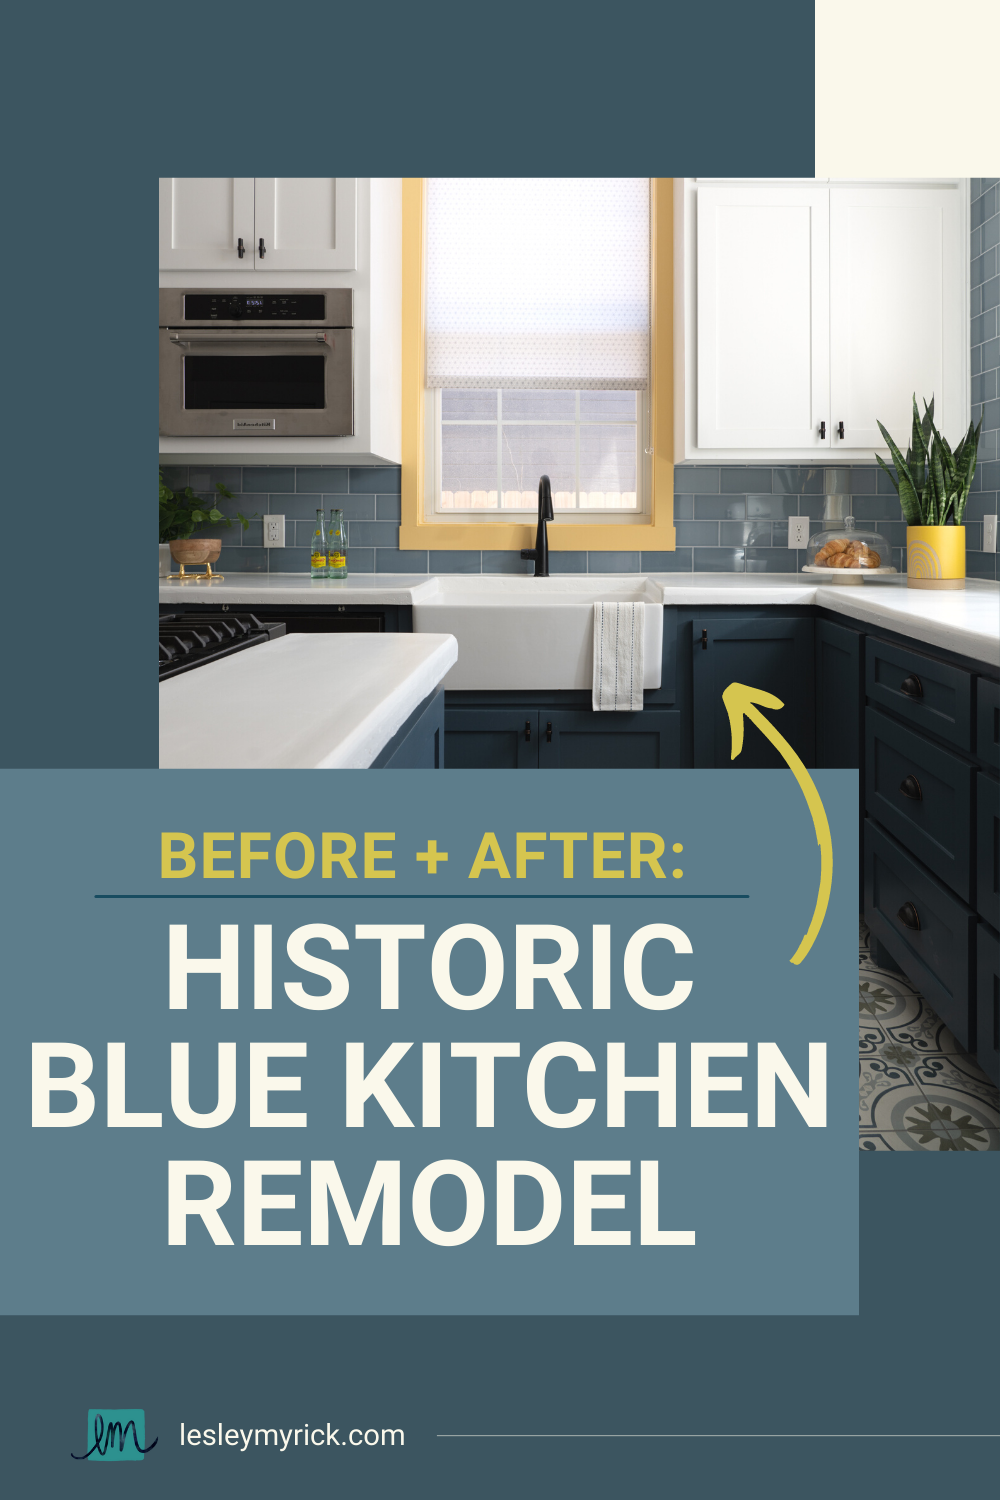 Before and after photos of a historic blue kitchen remodel by Lesley Myrick Interior Design